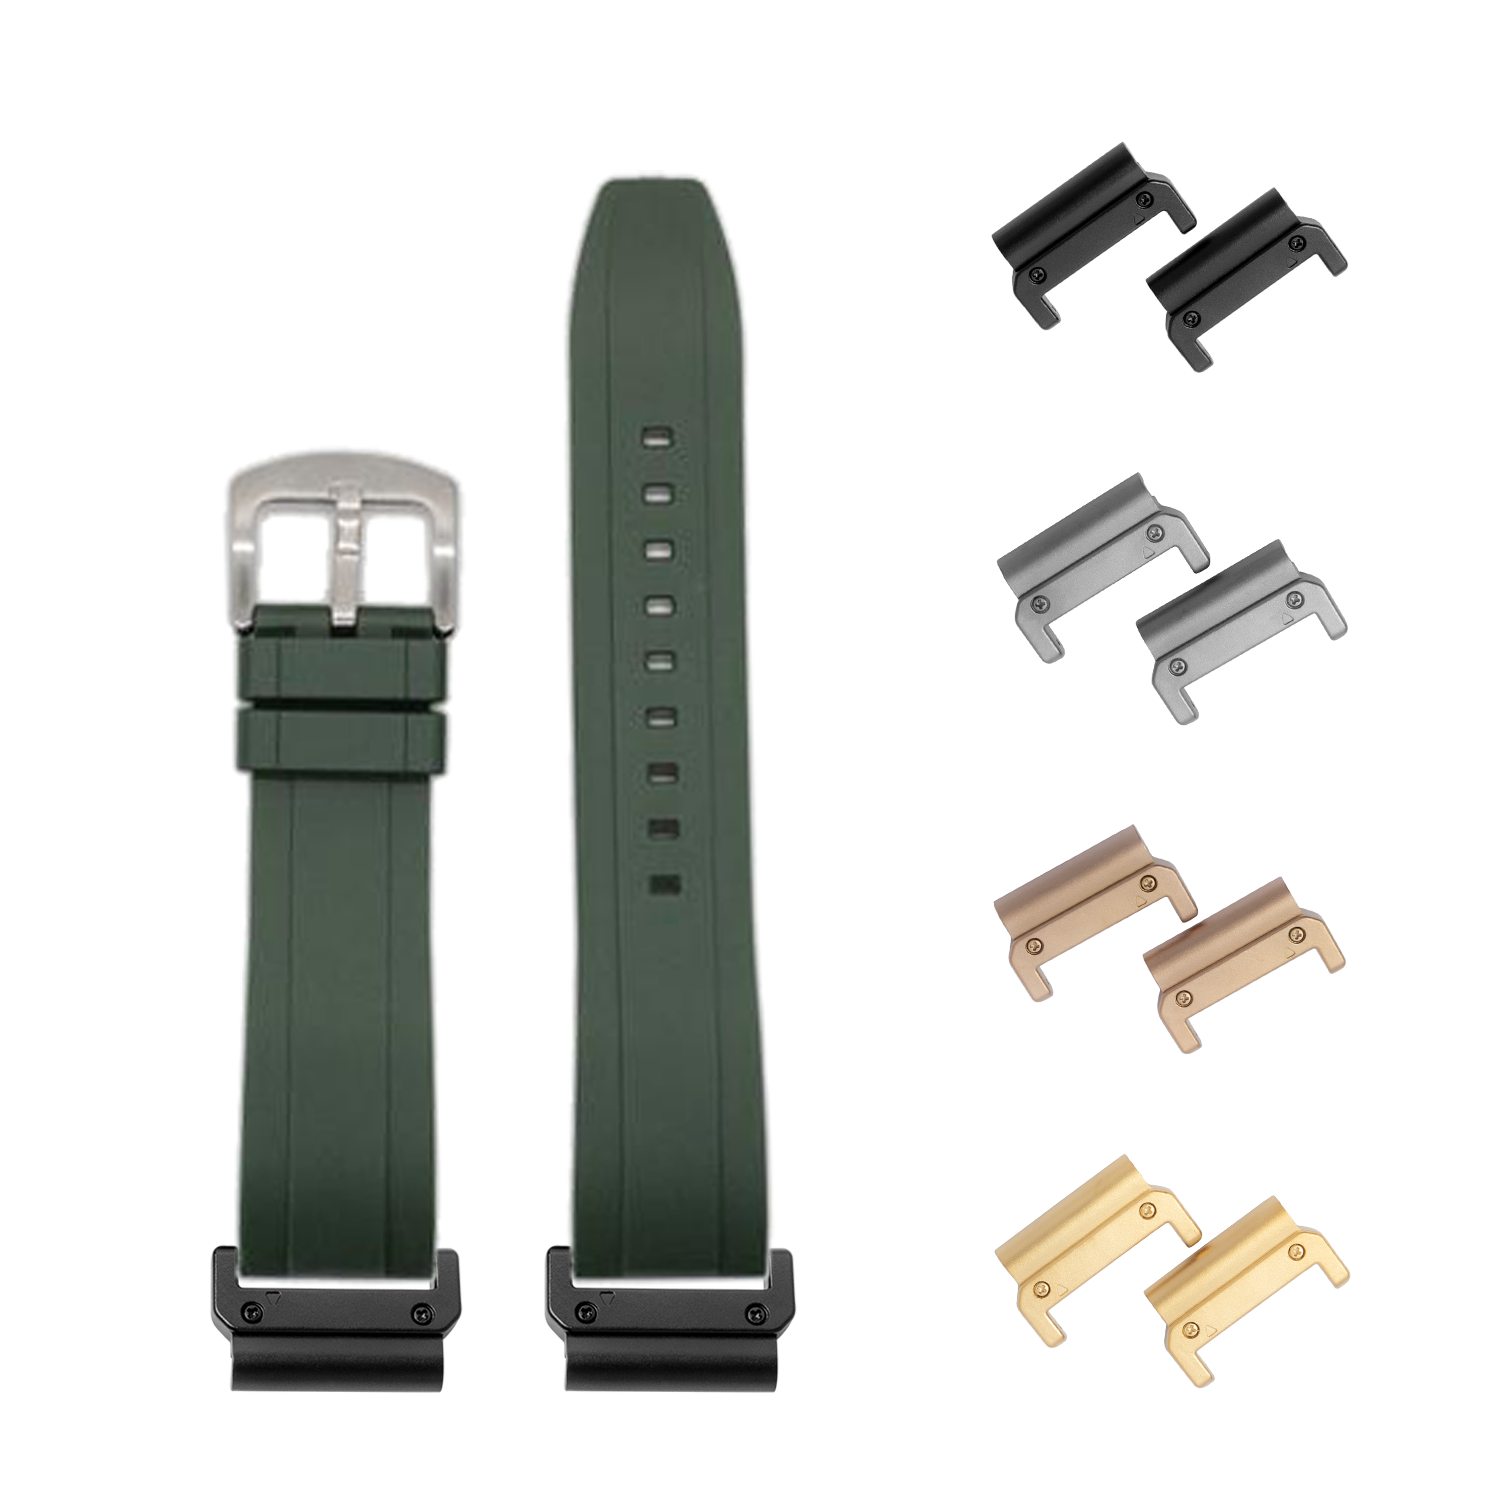 [QuickFit] Kingston FKM Rubber - Forest Green 26mm